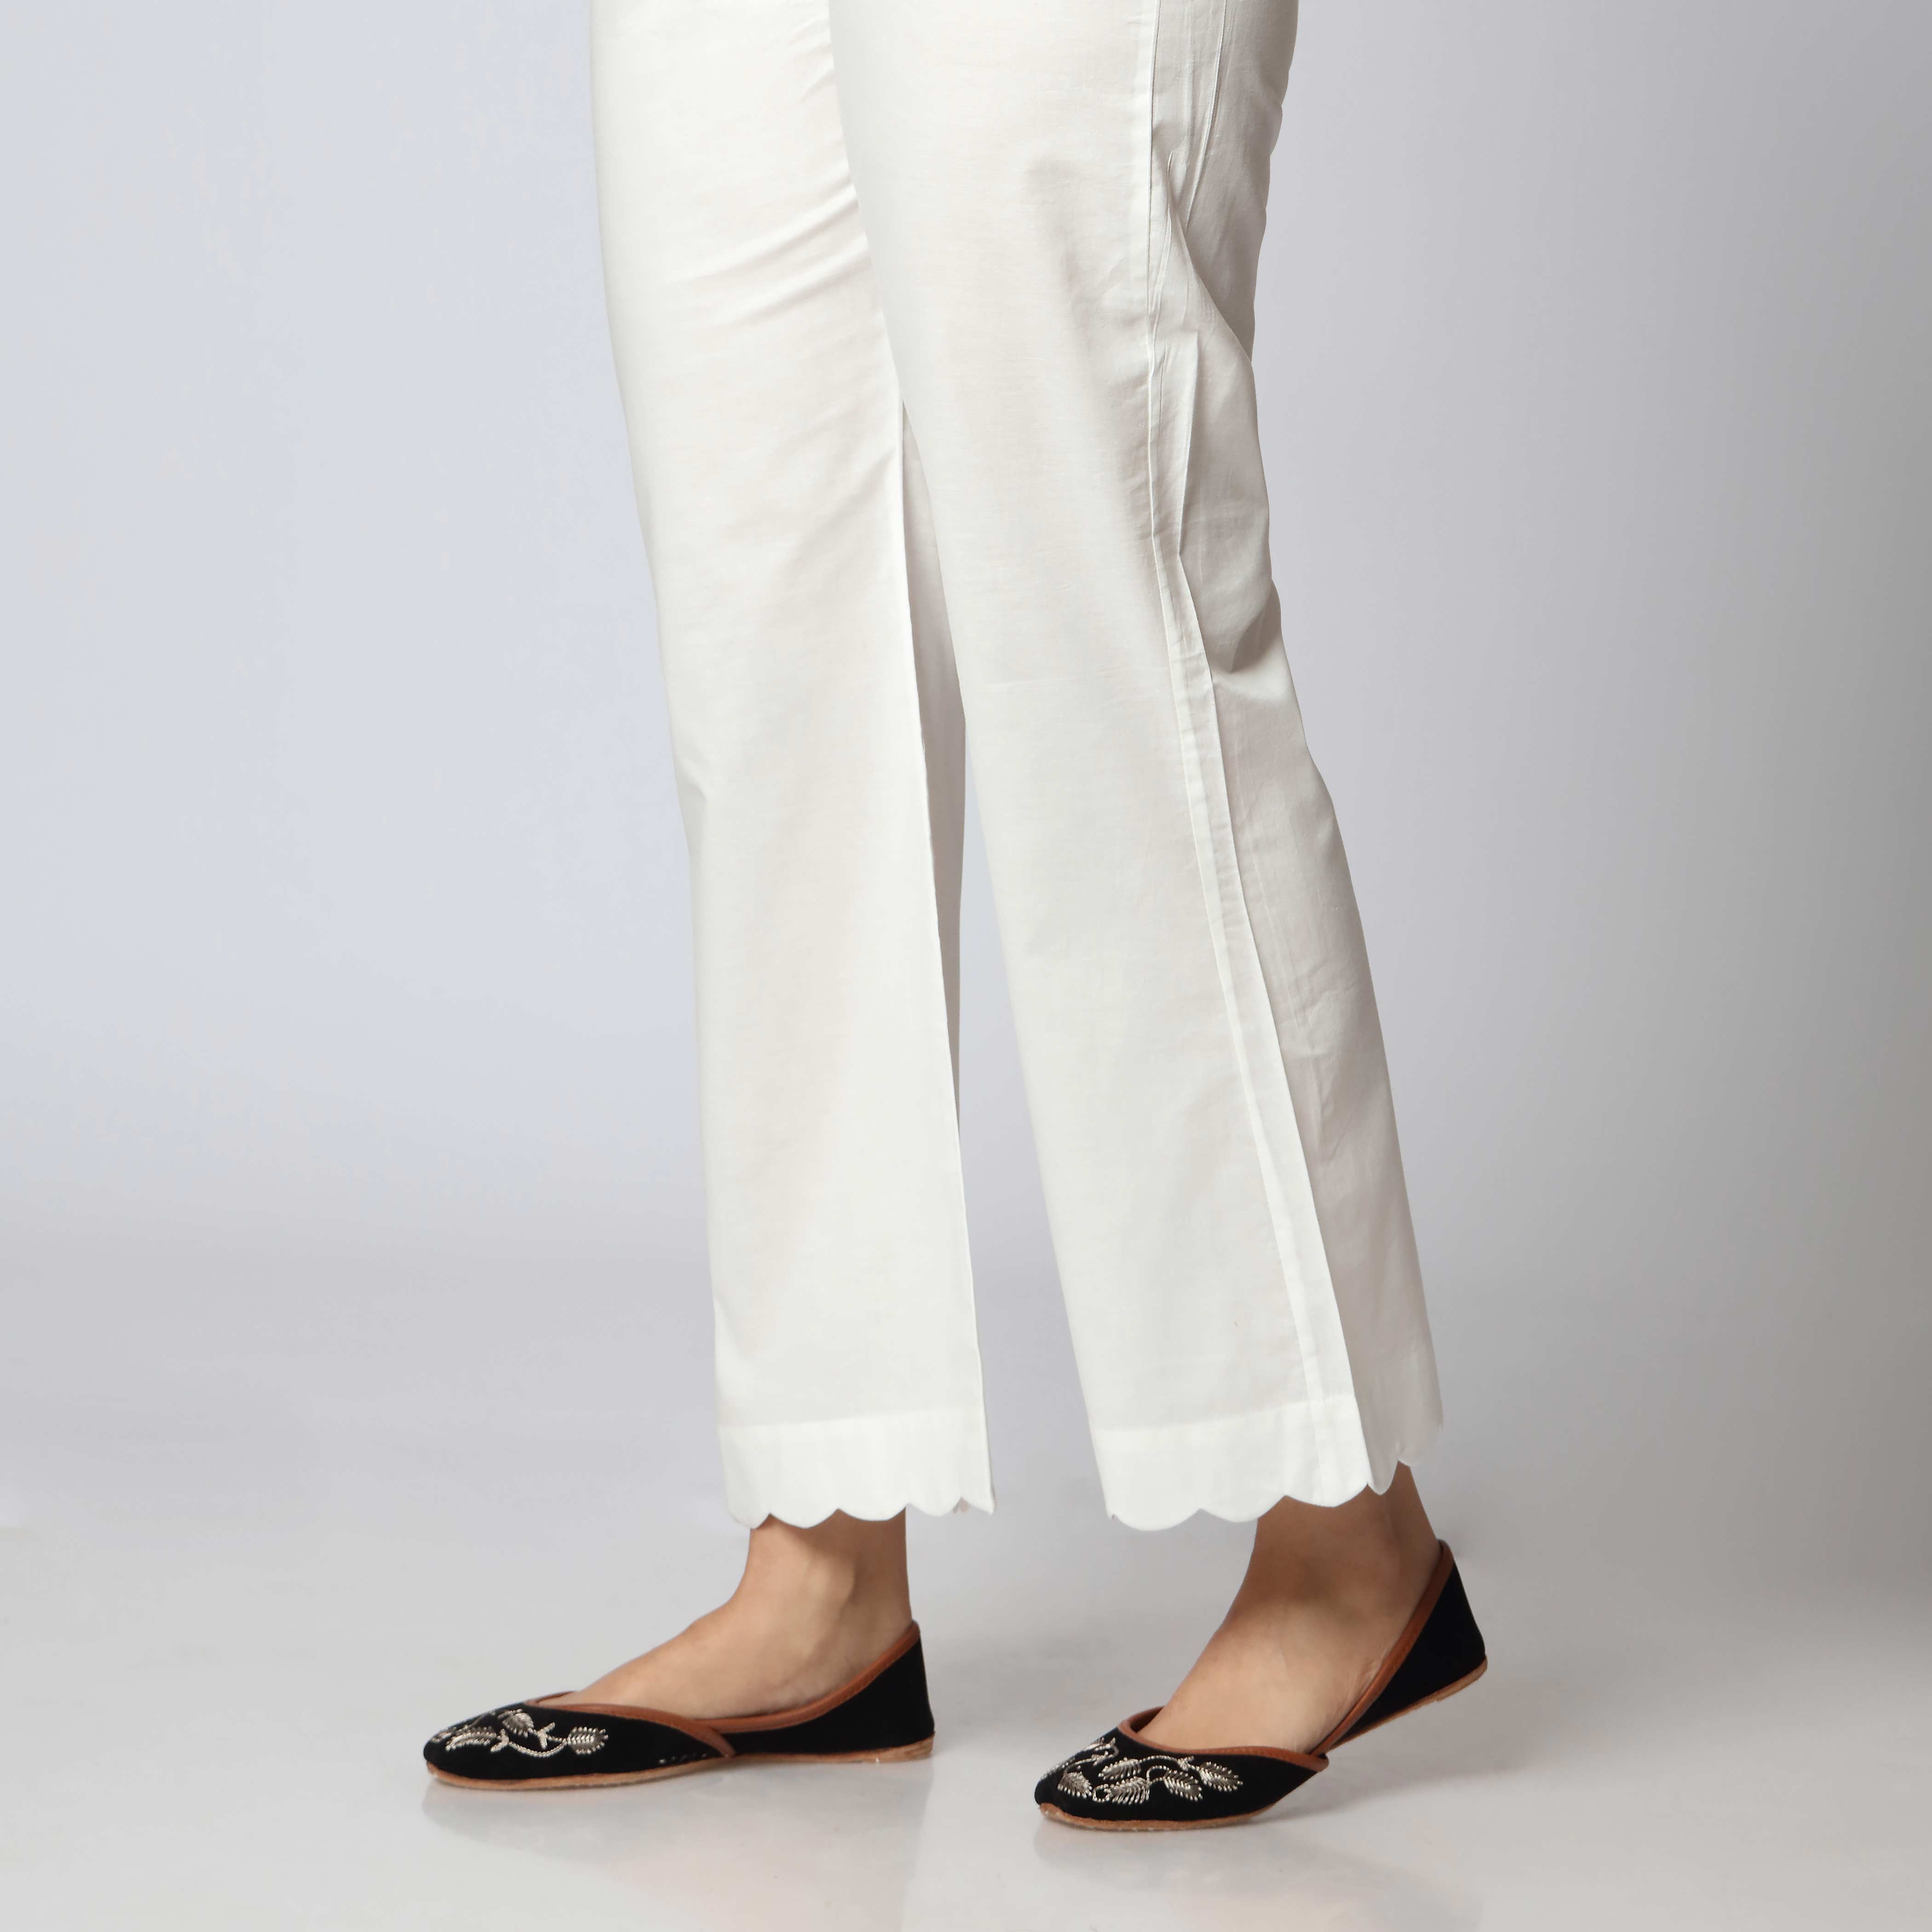 Buy This Bell Bottom Trouser Design With Shirt In USA 